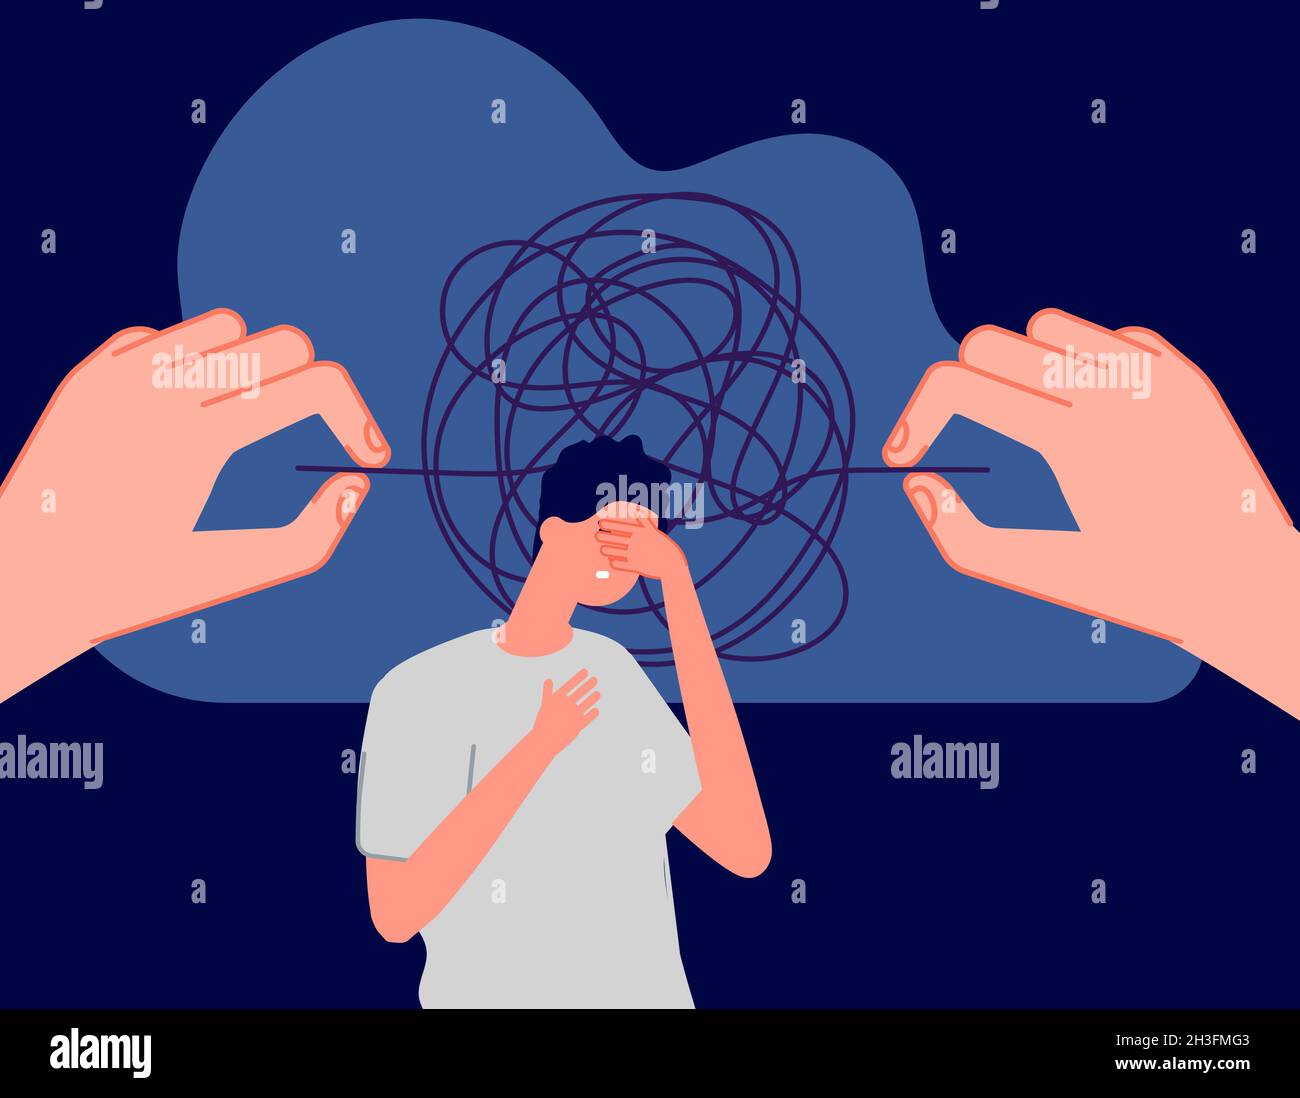 Psychotherapy. Mental disorder, sad man with confused thoughts. Hands unravel the tangled tangle, psycho treatment vector metaphor Stock Vector